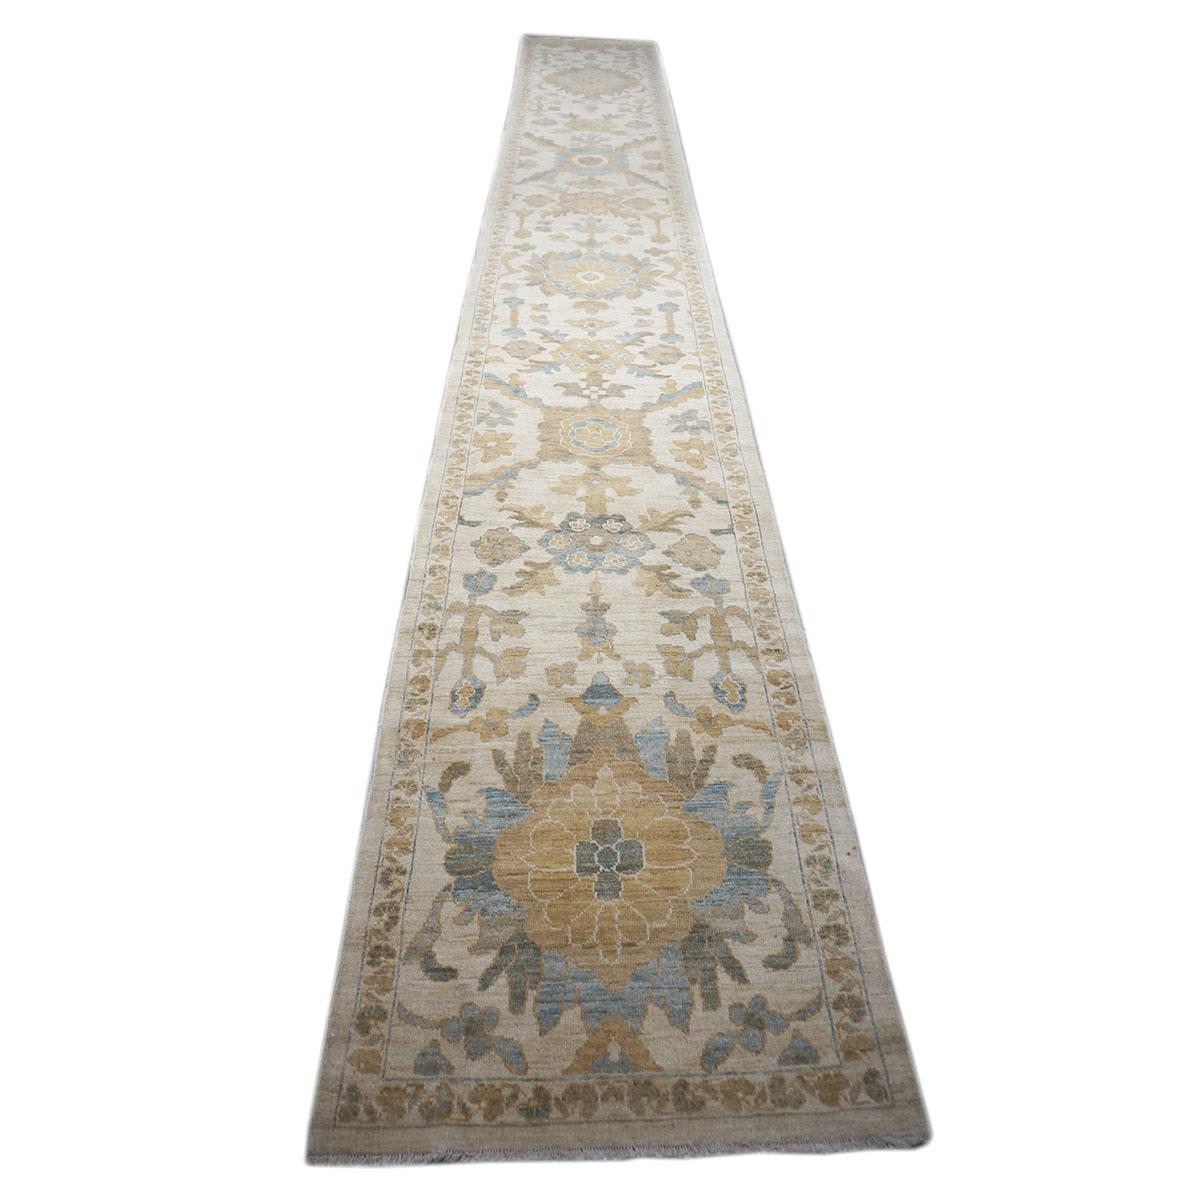 21st-century hand-woven Recreation of an antique Ziegler Sultanabad wool hallway runner rug. Created by our in-house designers and woven by our expert weavers in Persia with hand-spun vegetable-dyed wools.

Collection: Ashly Sultanabad